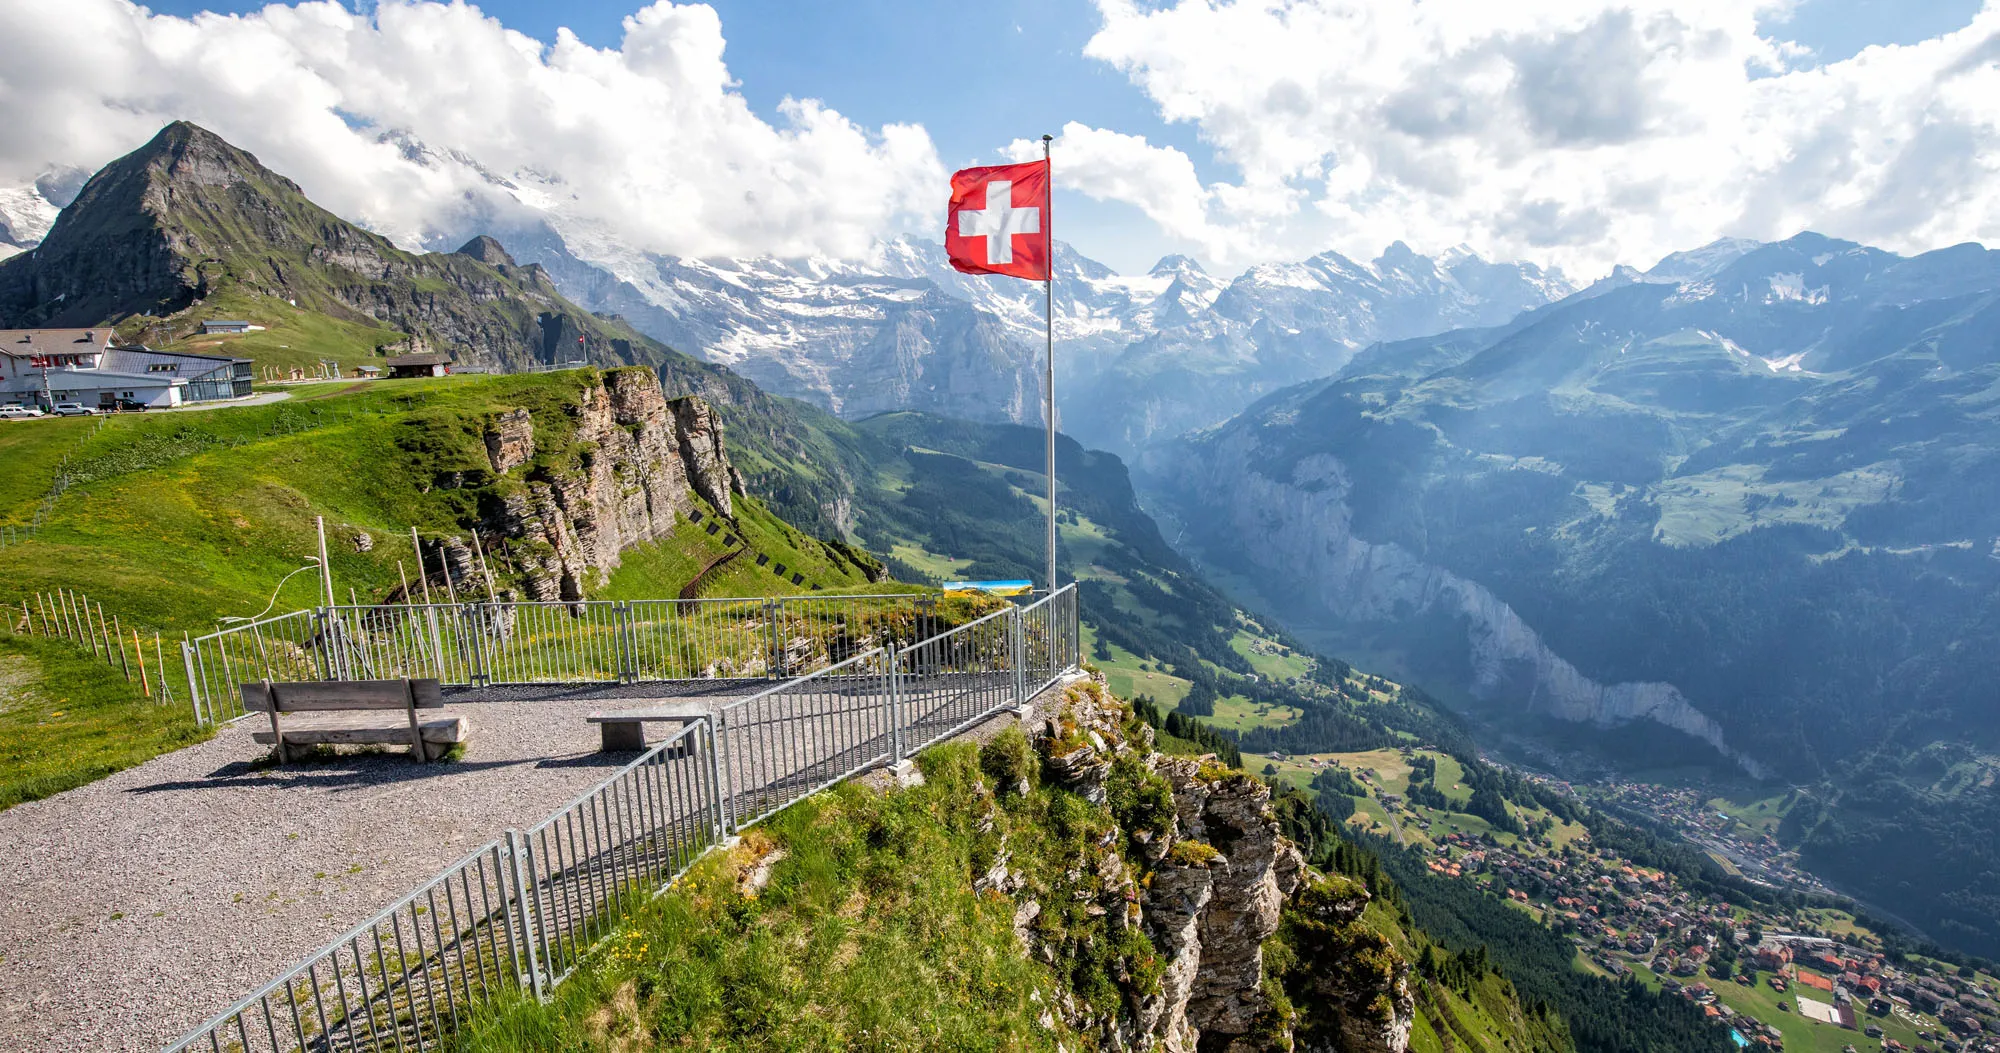 Featured image for “20 Amazing Things to Do in the Jungfrau Region of the Bernese Oberland”